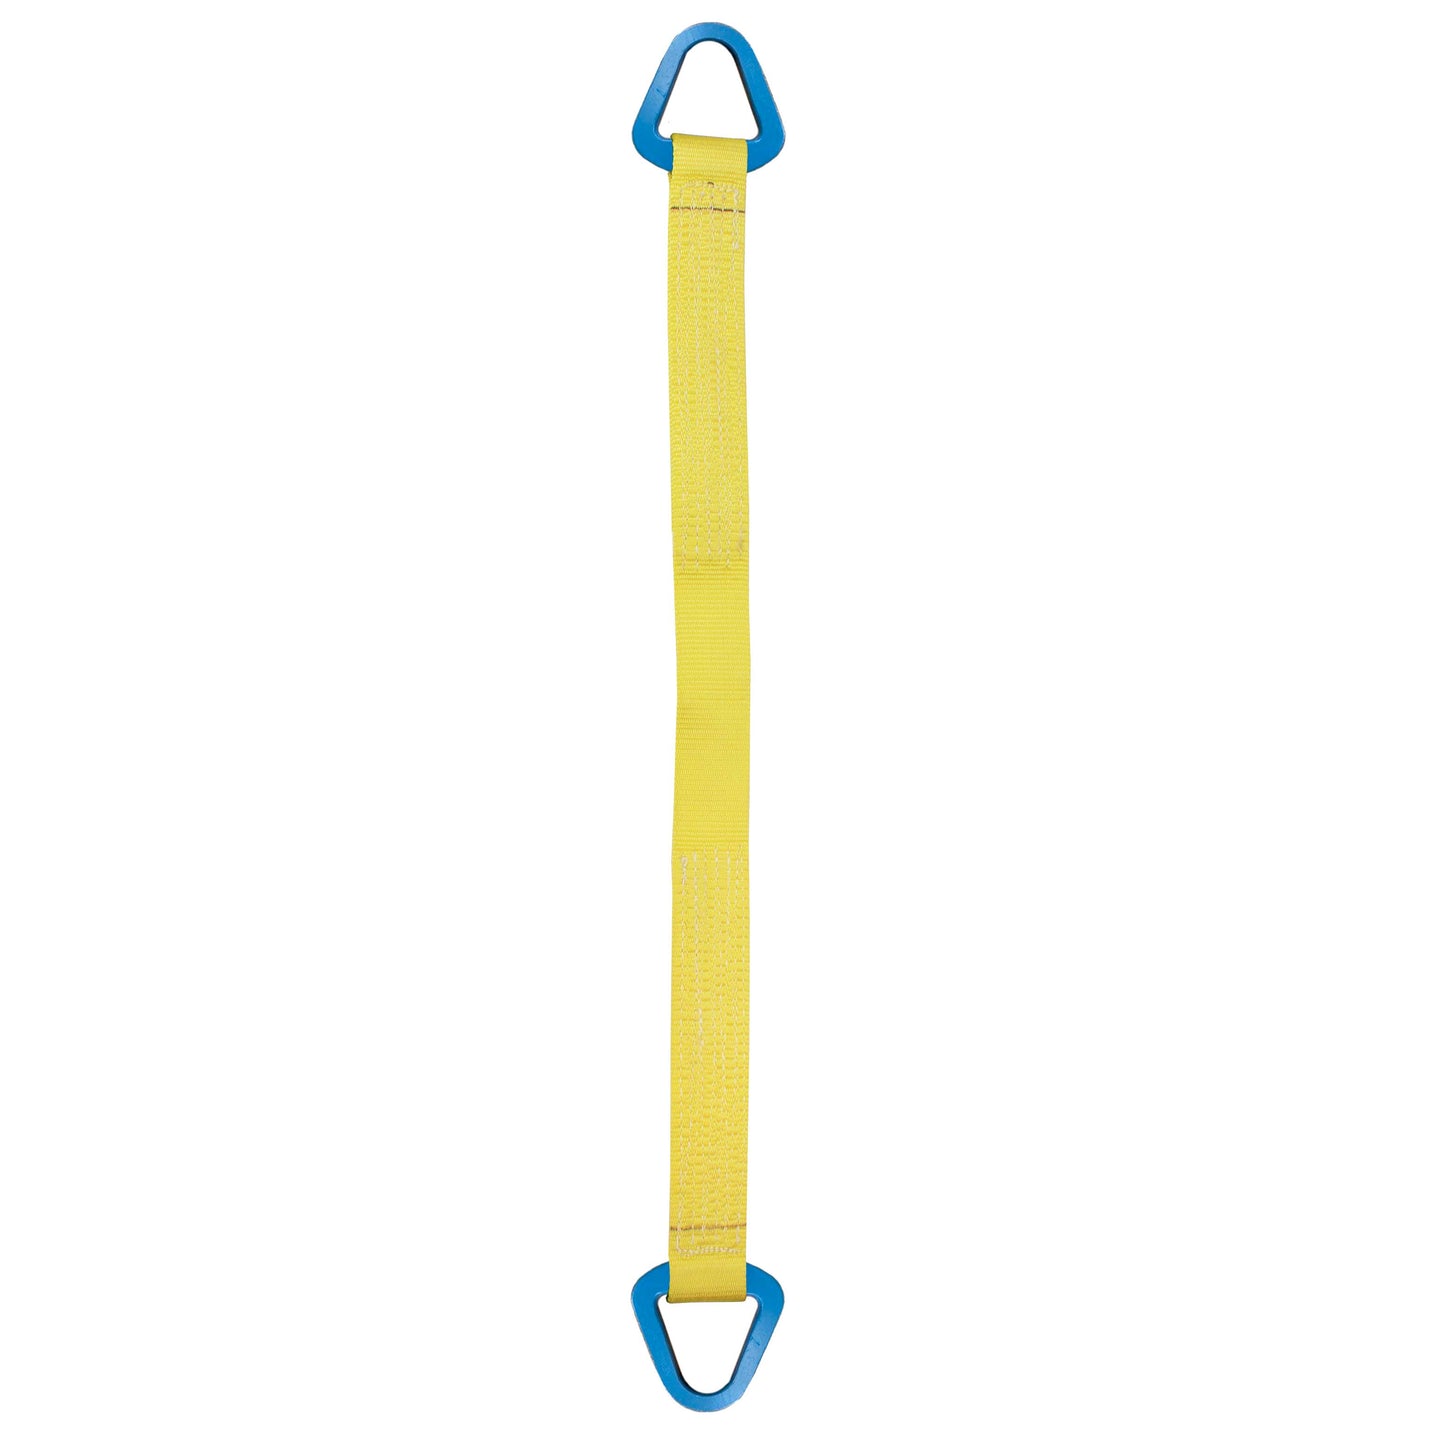 Nylon Lifting Sling Triangle 6 inch x 4 foot 2ply image 1 of 2